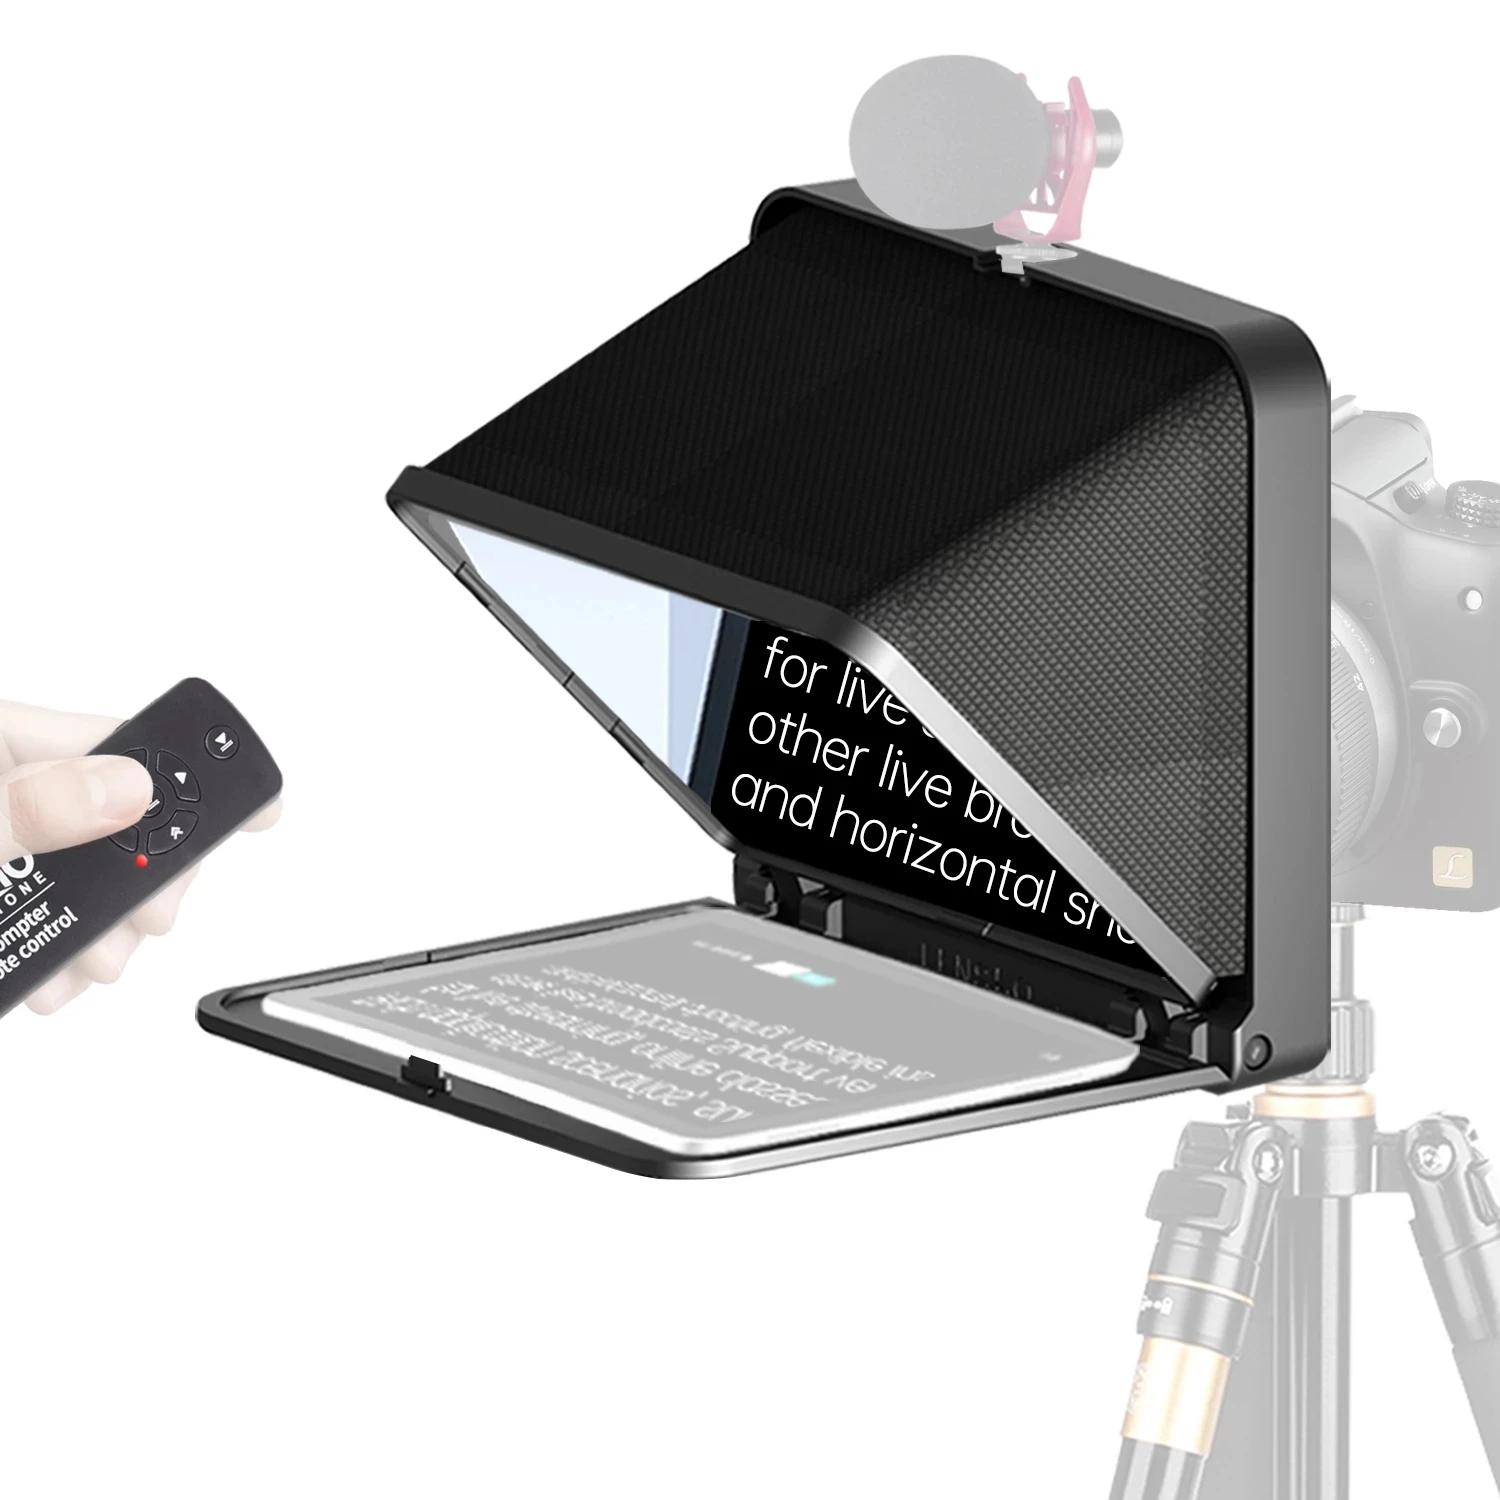 

LENSGO TC7 Fold Prompter Portable Teleprompter For Phone Camera for Live Interview Video for 7.9 inch Tablet iPad Smartphone